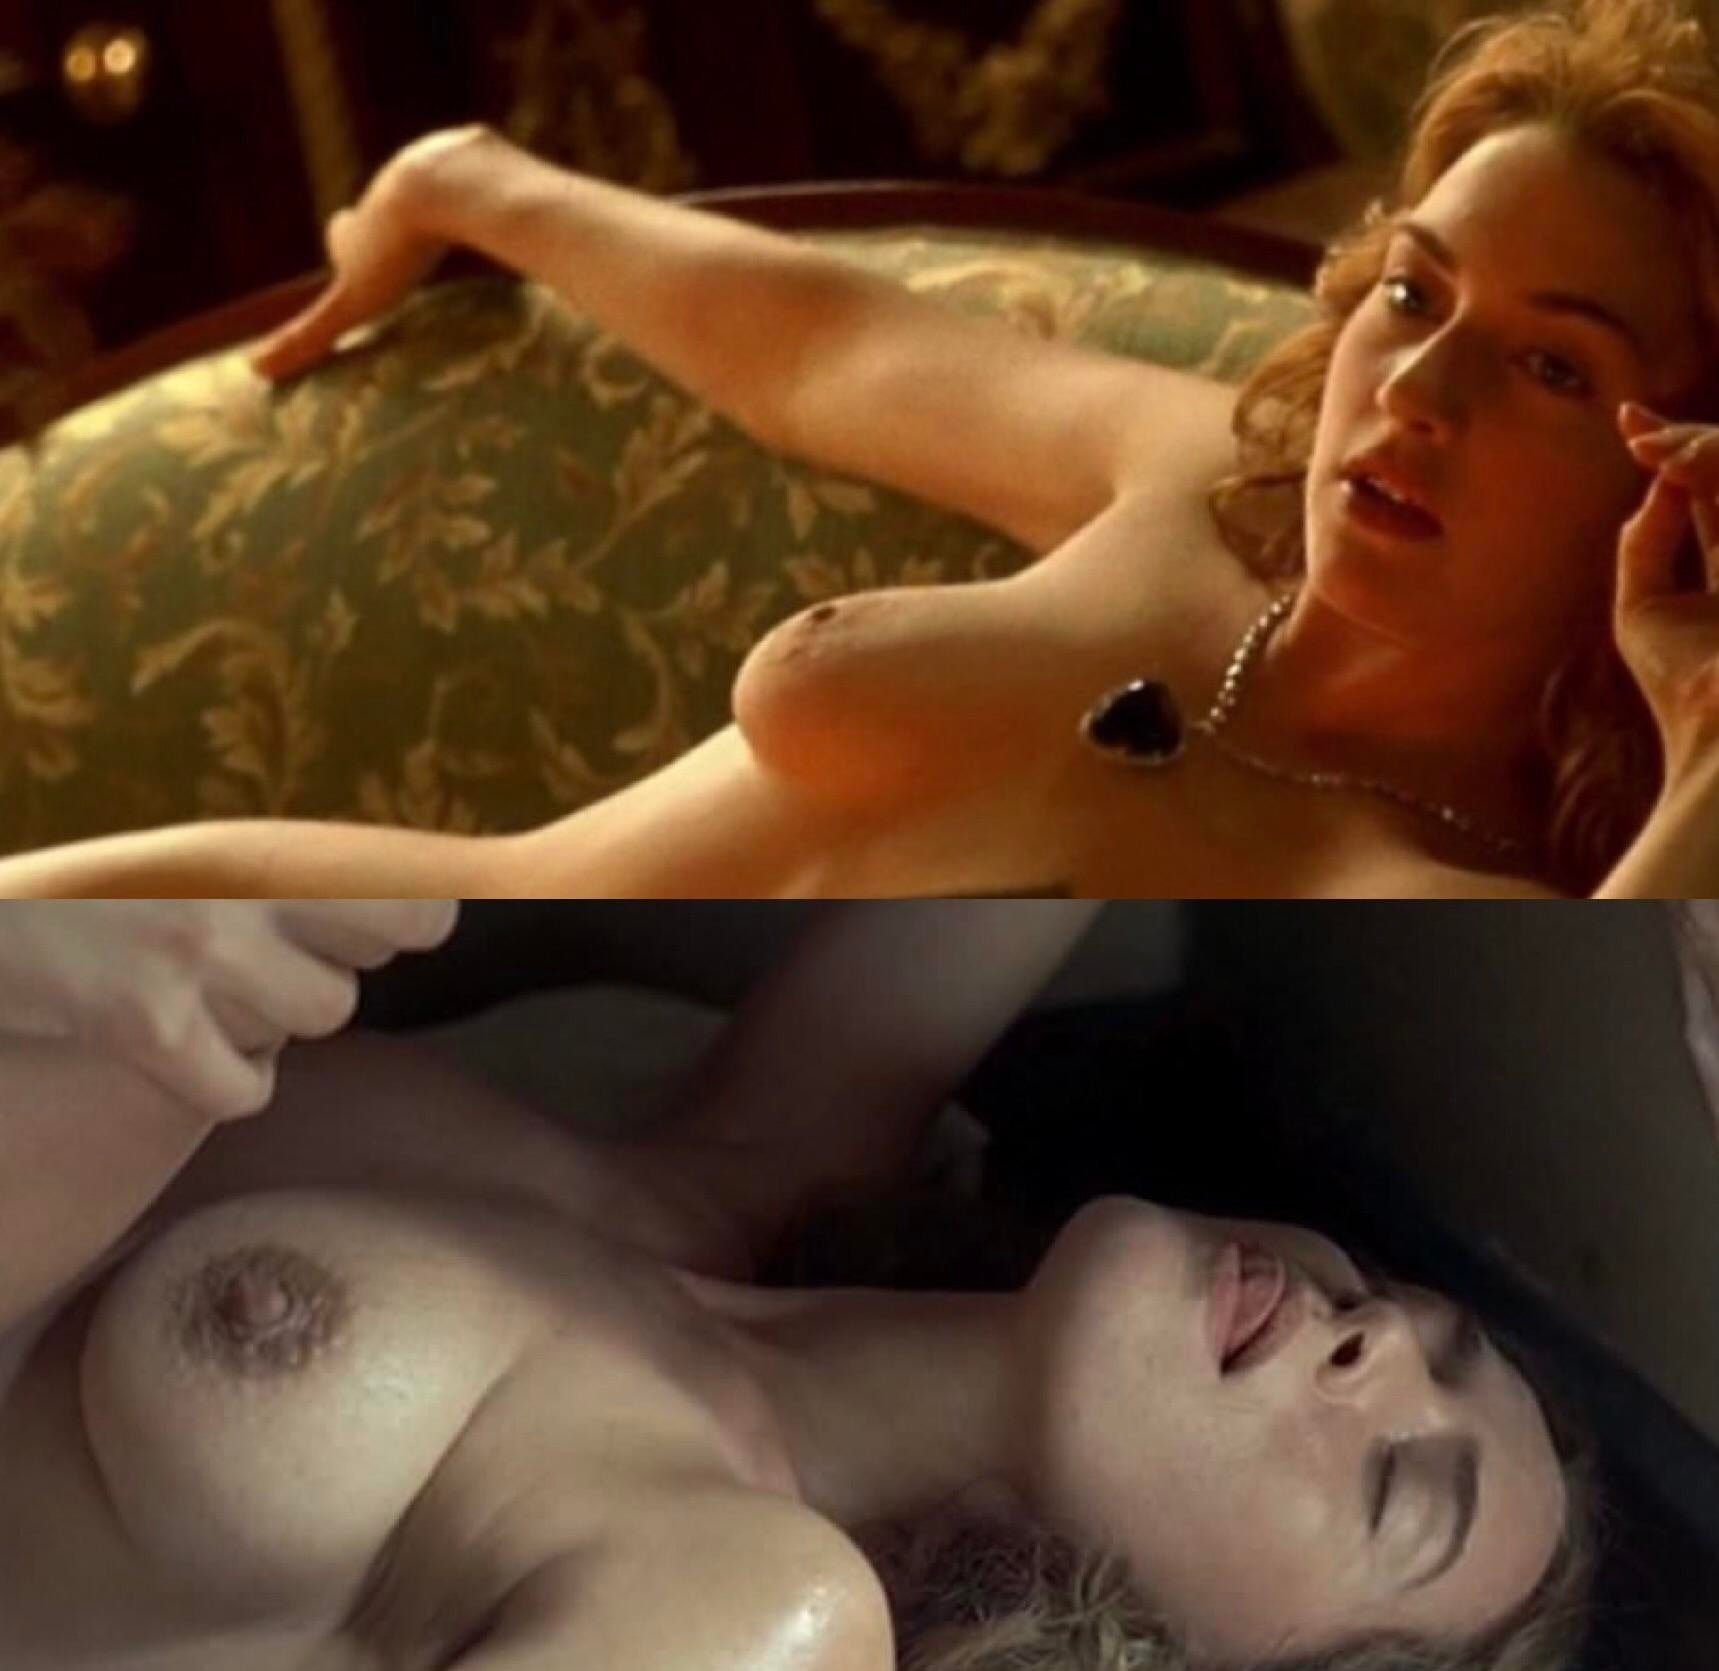 Kate winslet nude in movies